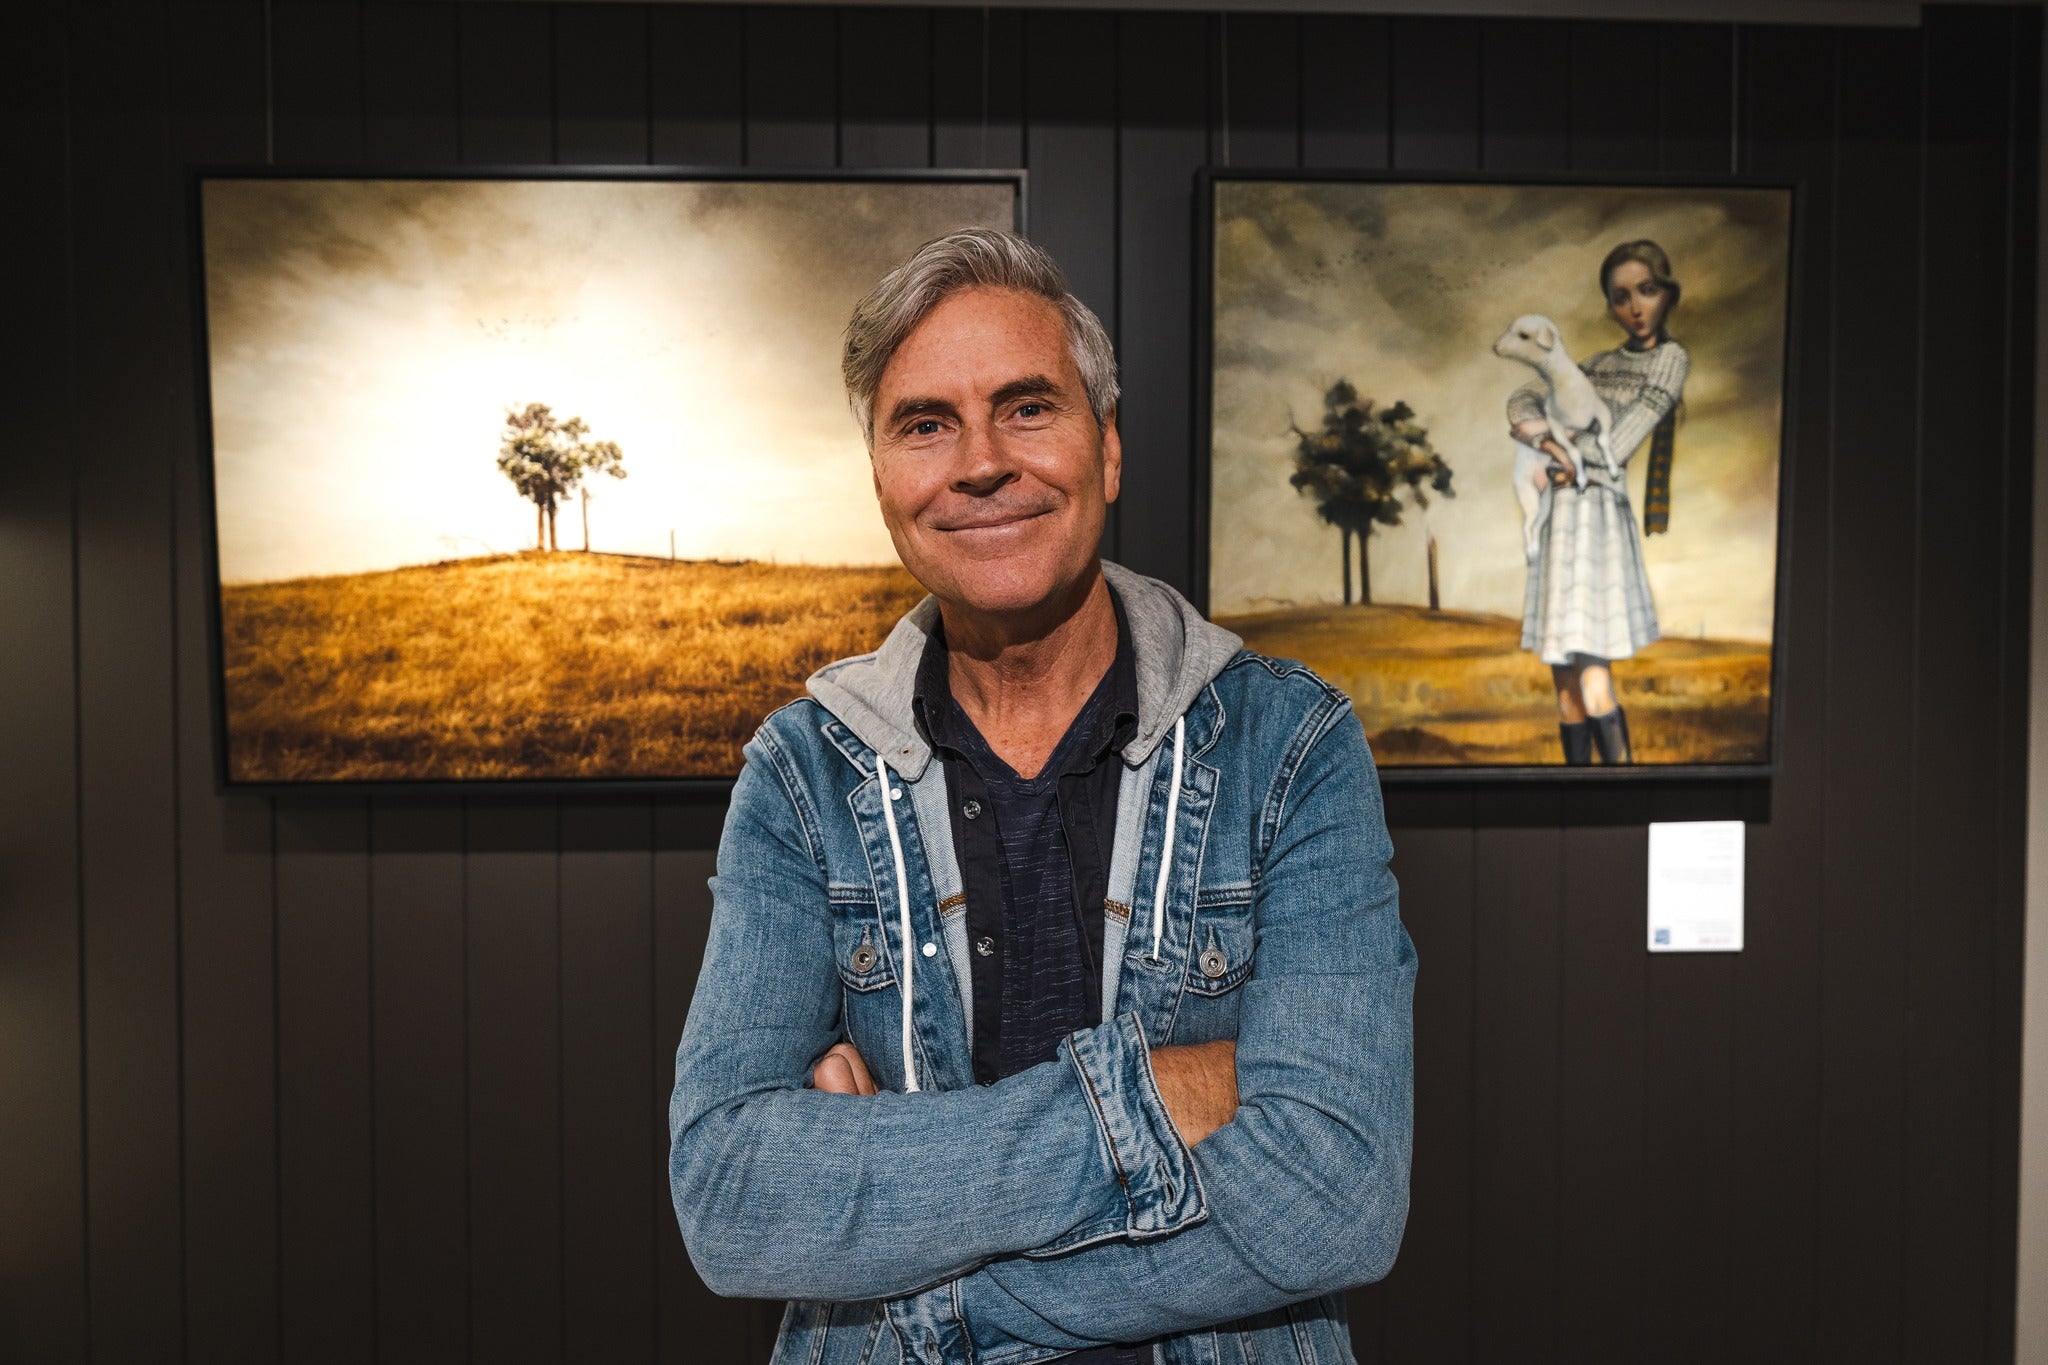 Christian Fletcher photographer in front of his image and a painting by Lauren Wilhelm in a collaborative exhbition.